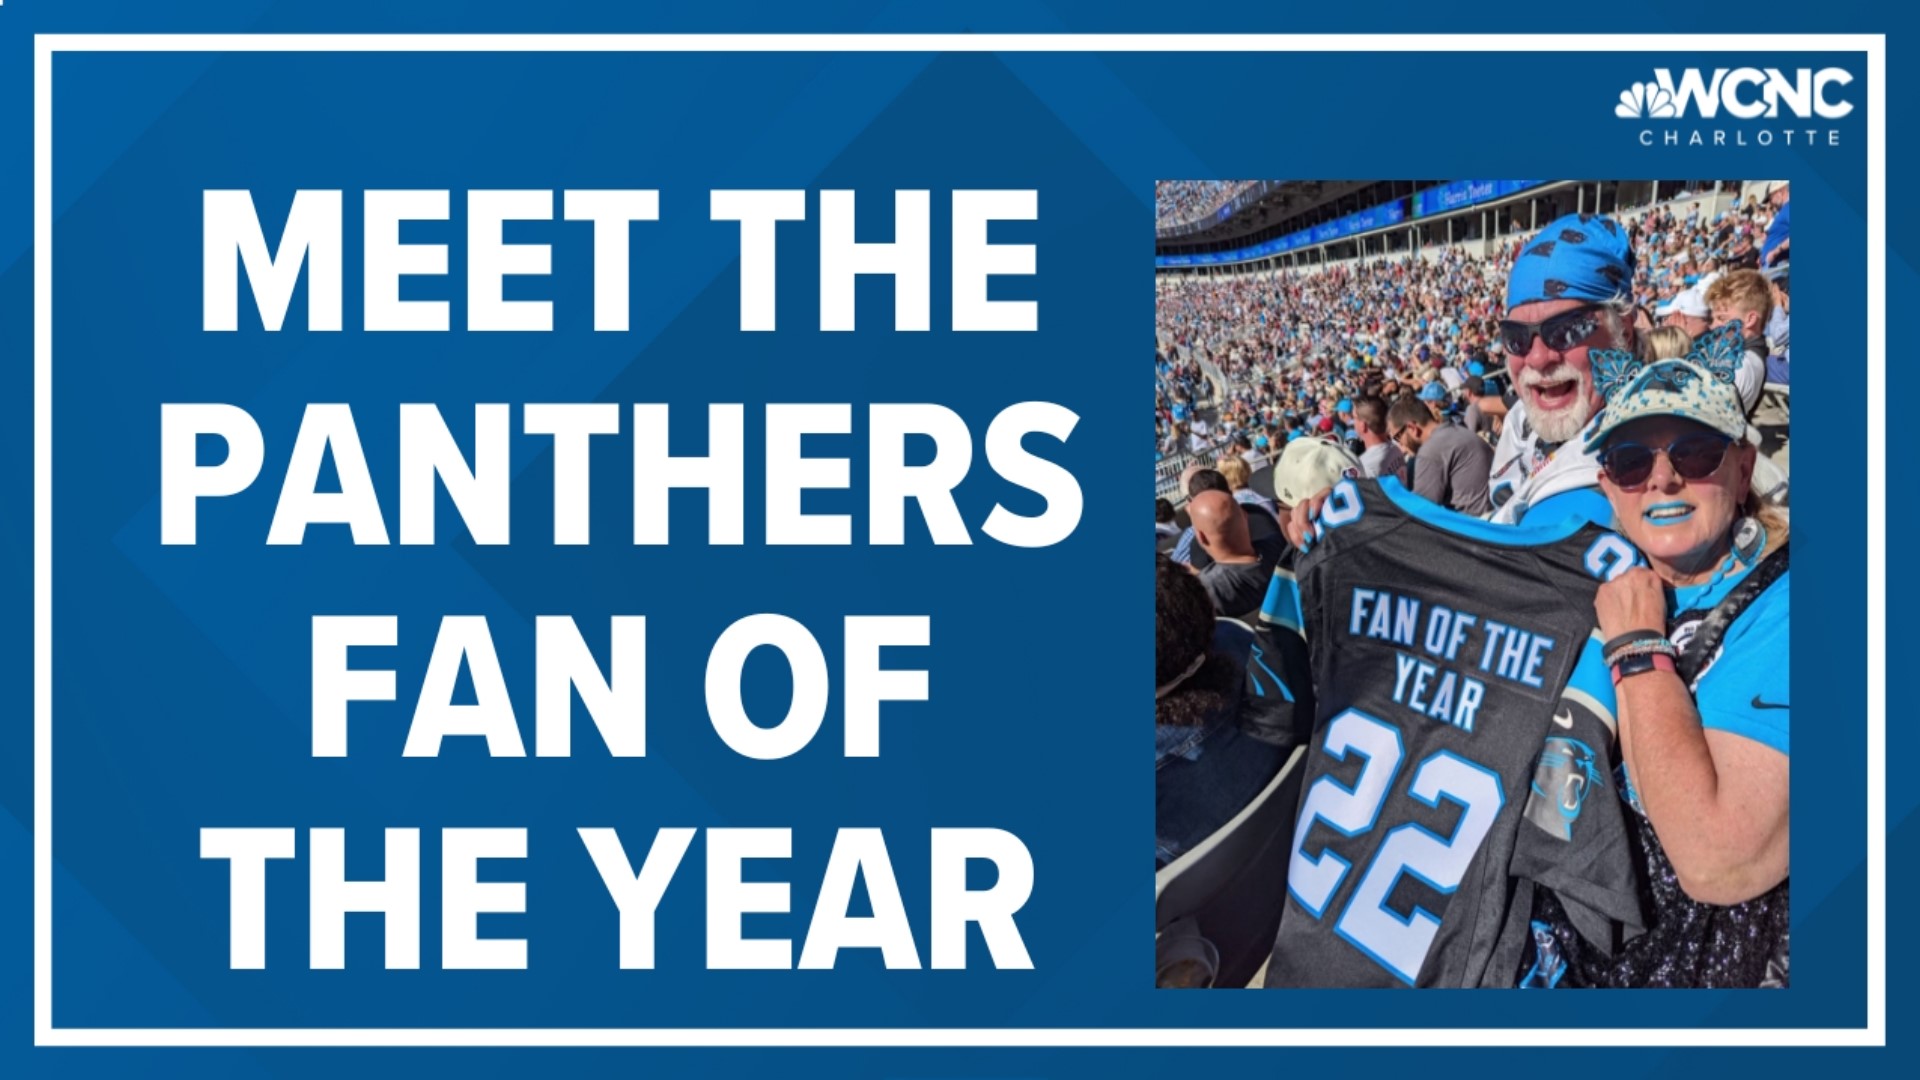 Dedicated Panthers superfan heading to the Super Bowl